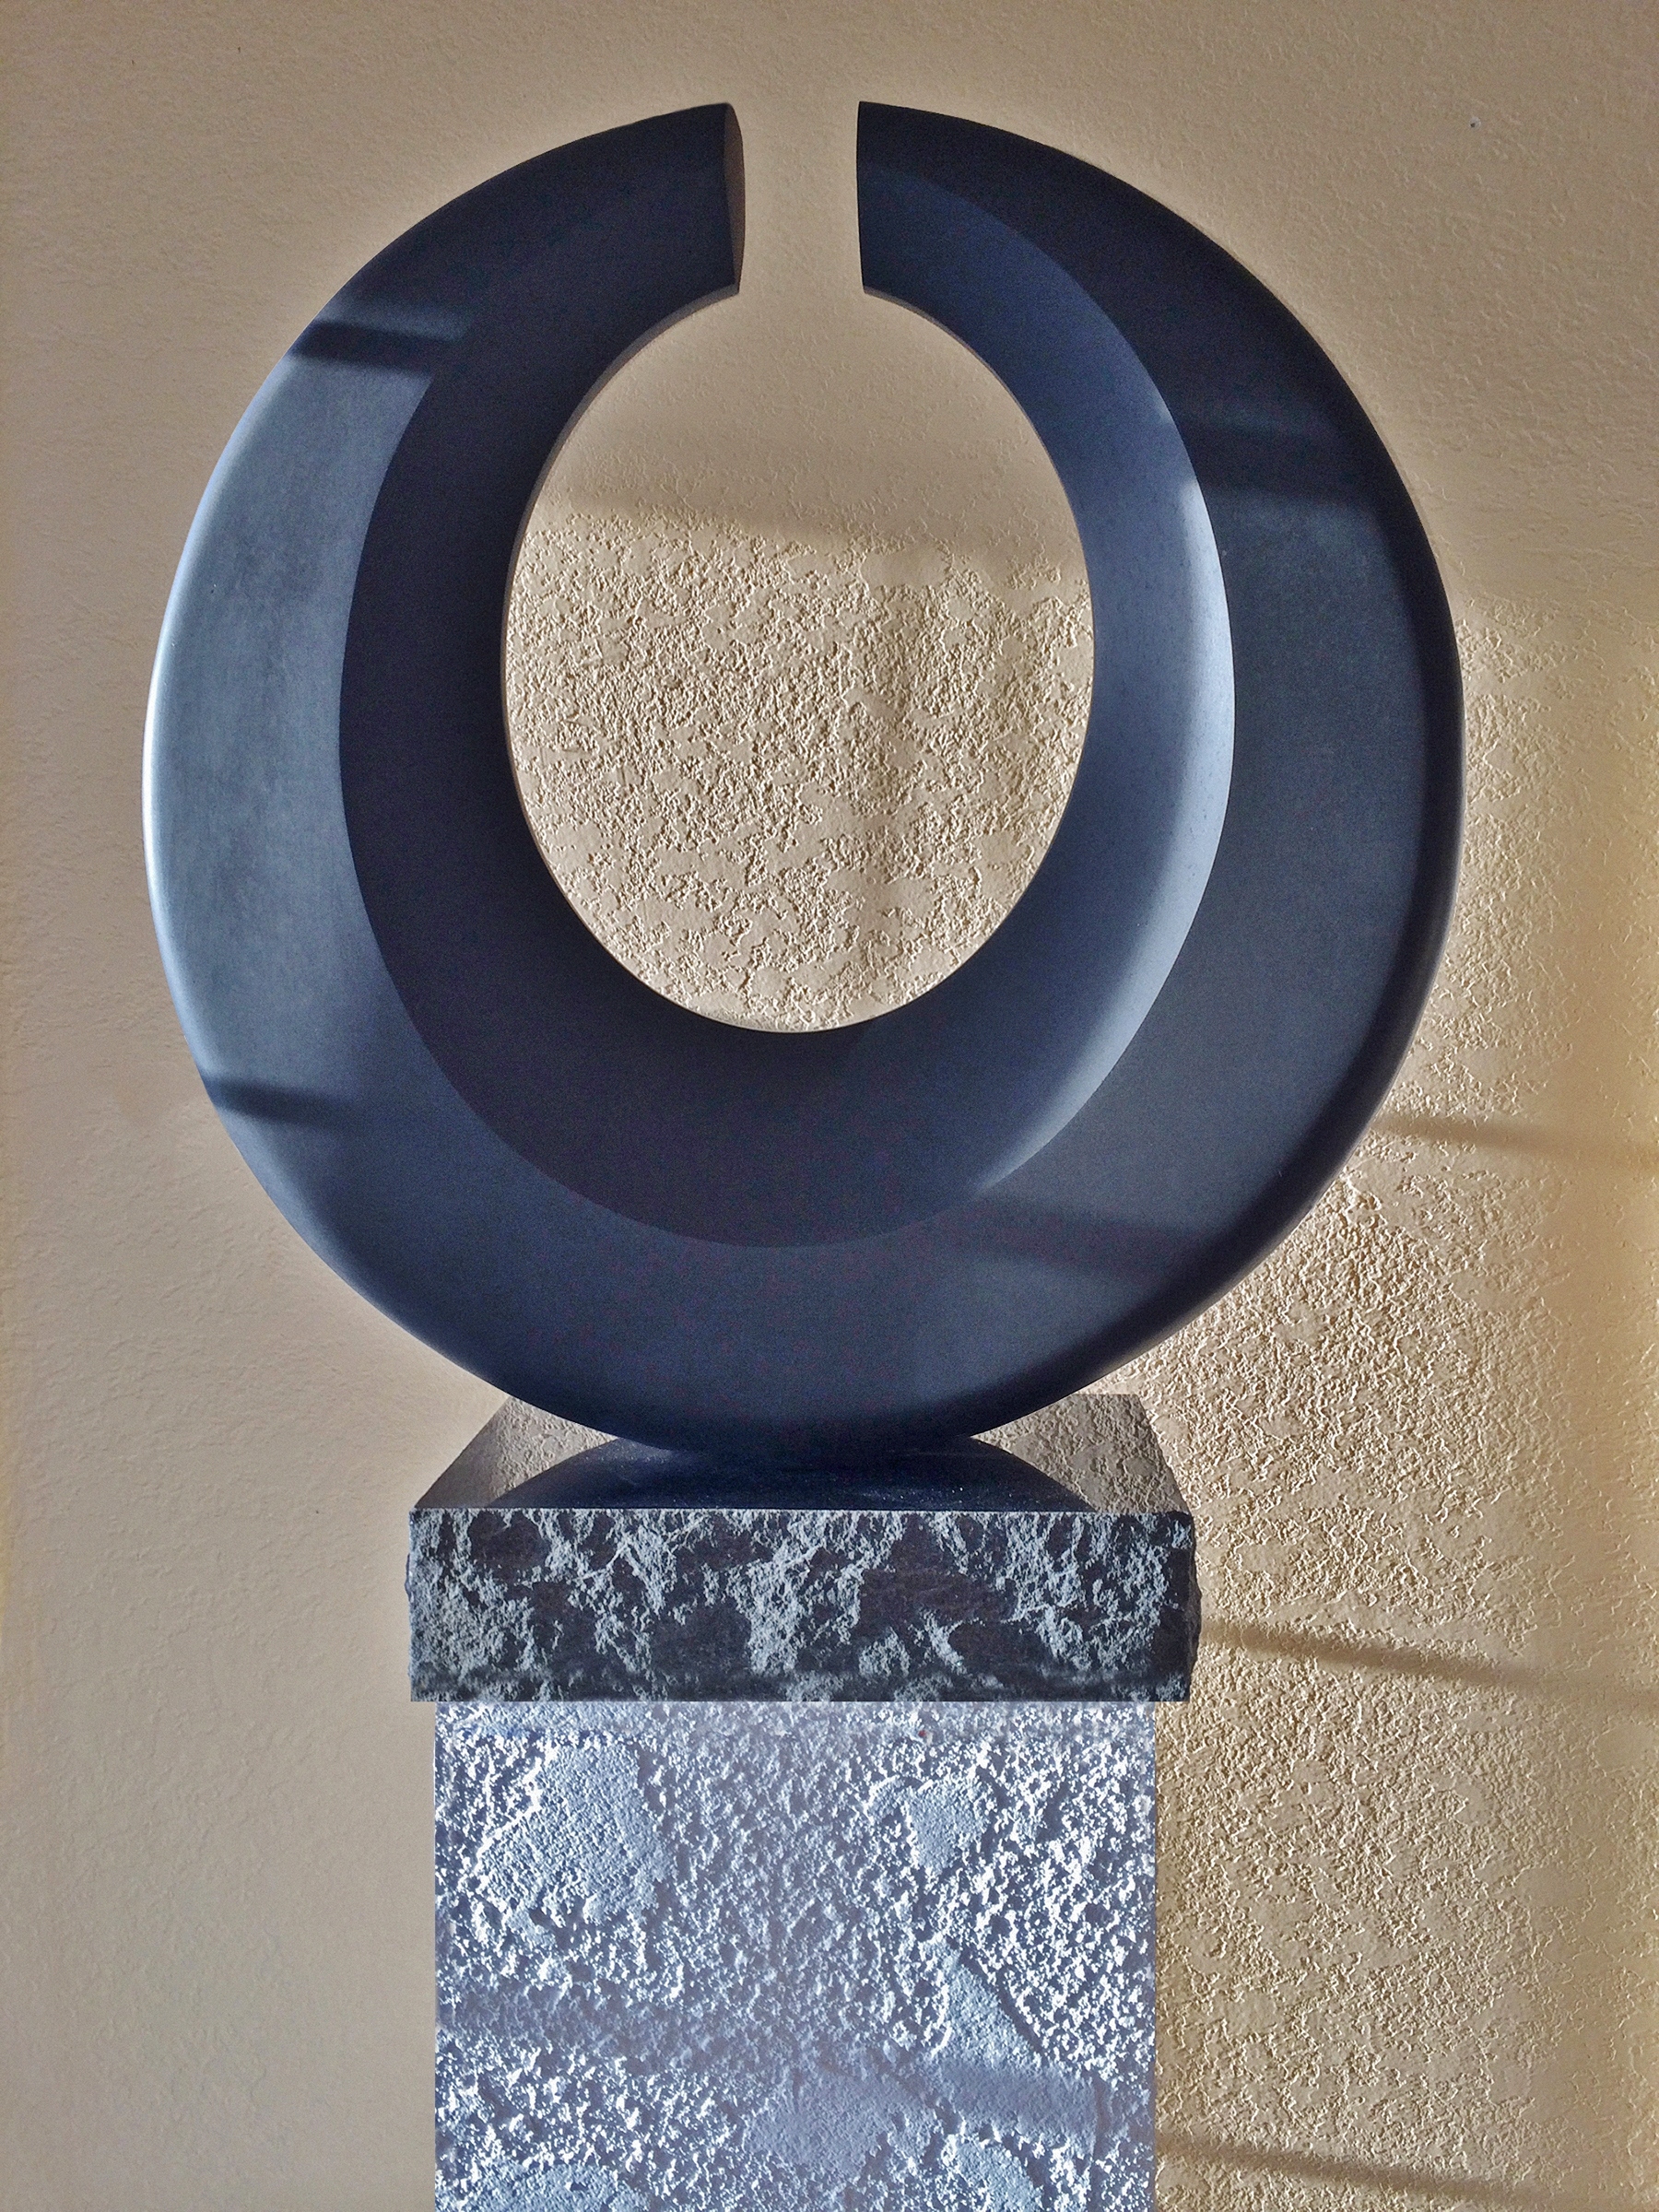 Another “Threshold” piece, basalt, 22"H x 21"W x 4"D at the base, tapering to 2 1/2"D at the top. 